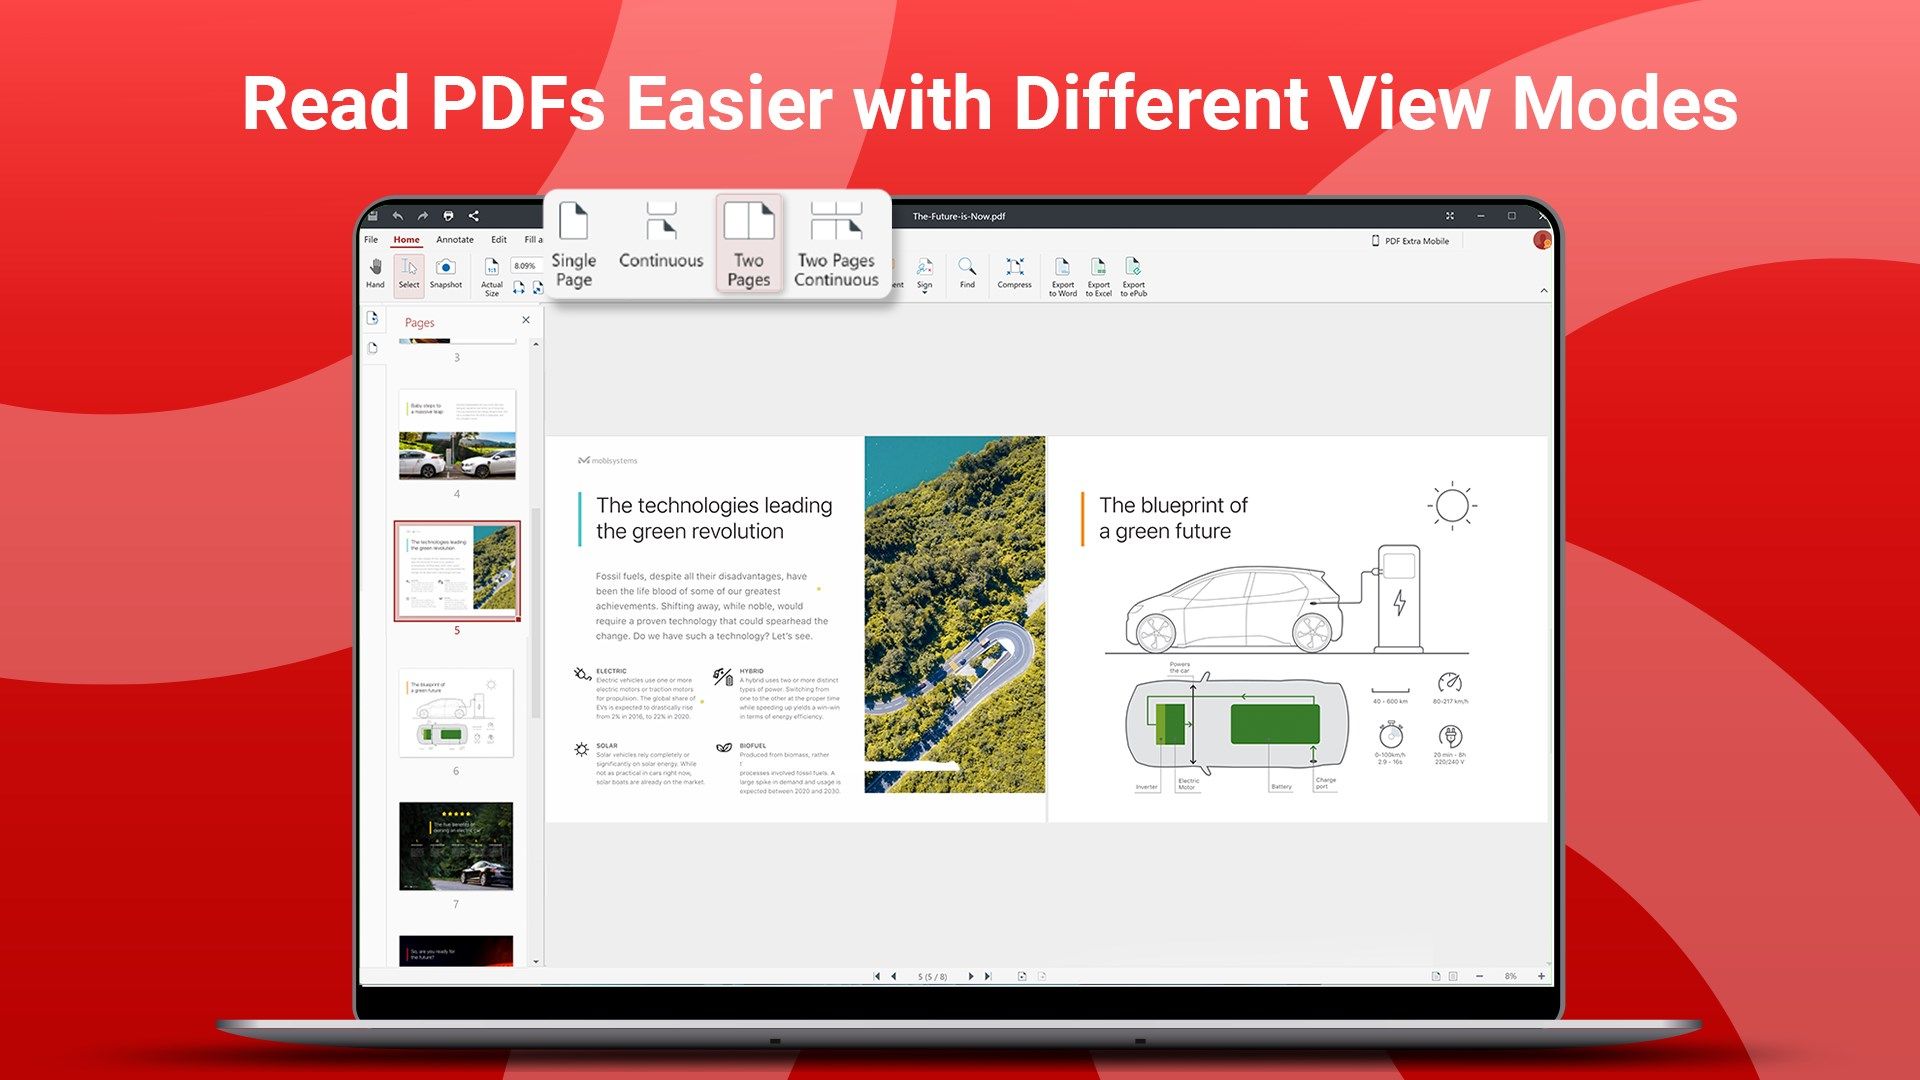 Control your PDF's structure, design or content. Edit text & images, rearrange pages or insert bookmarks.